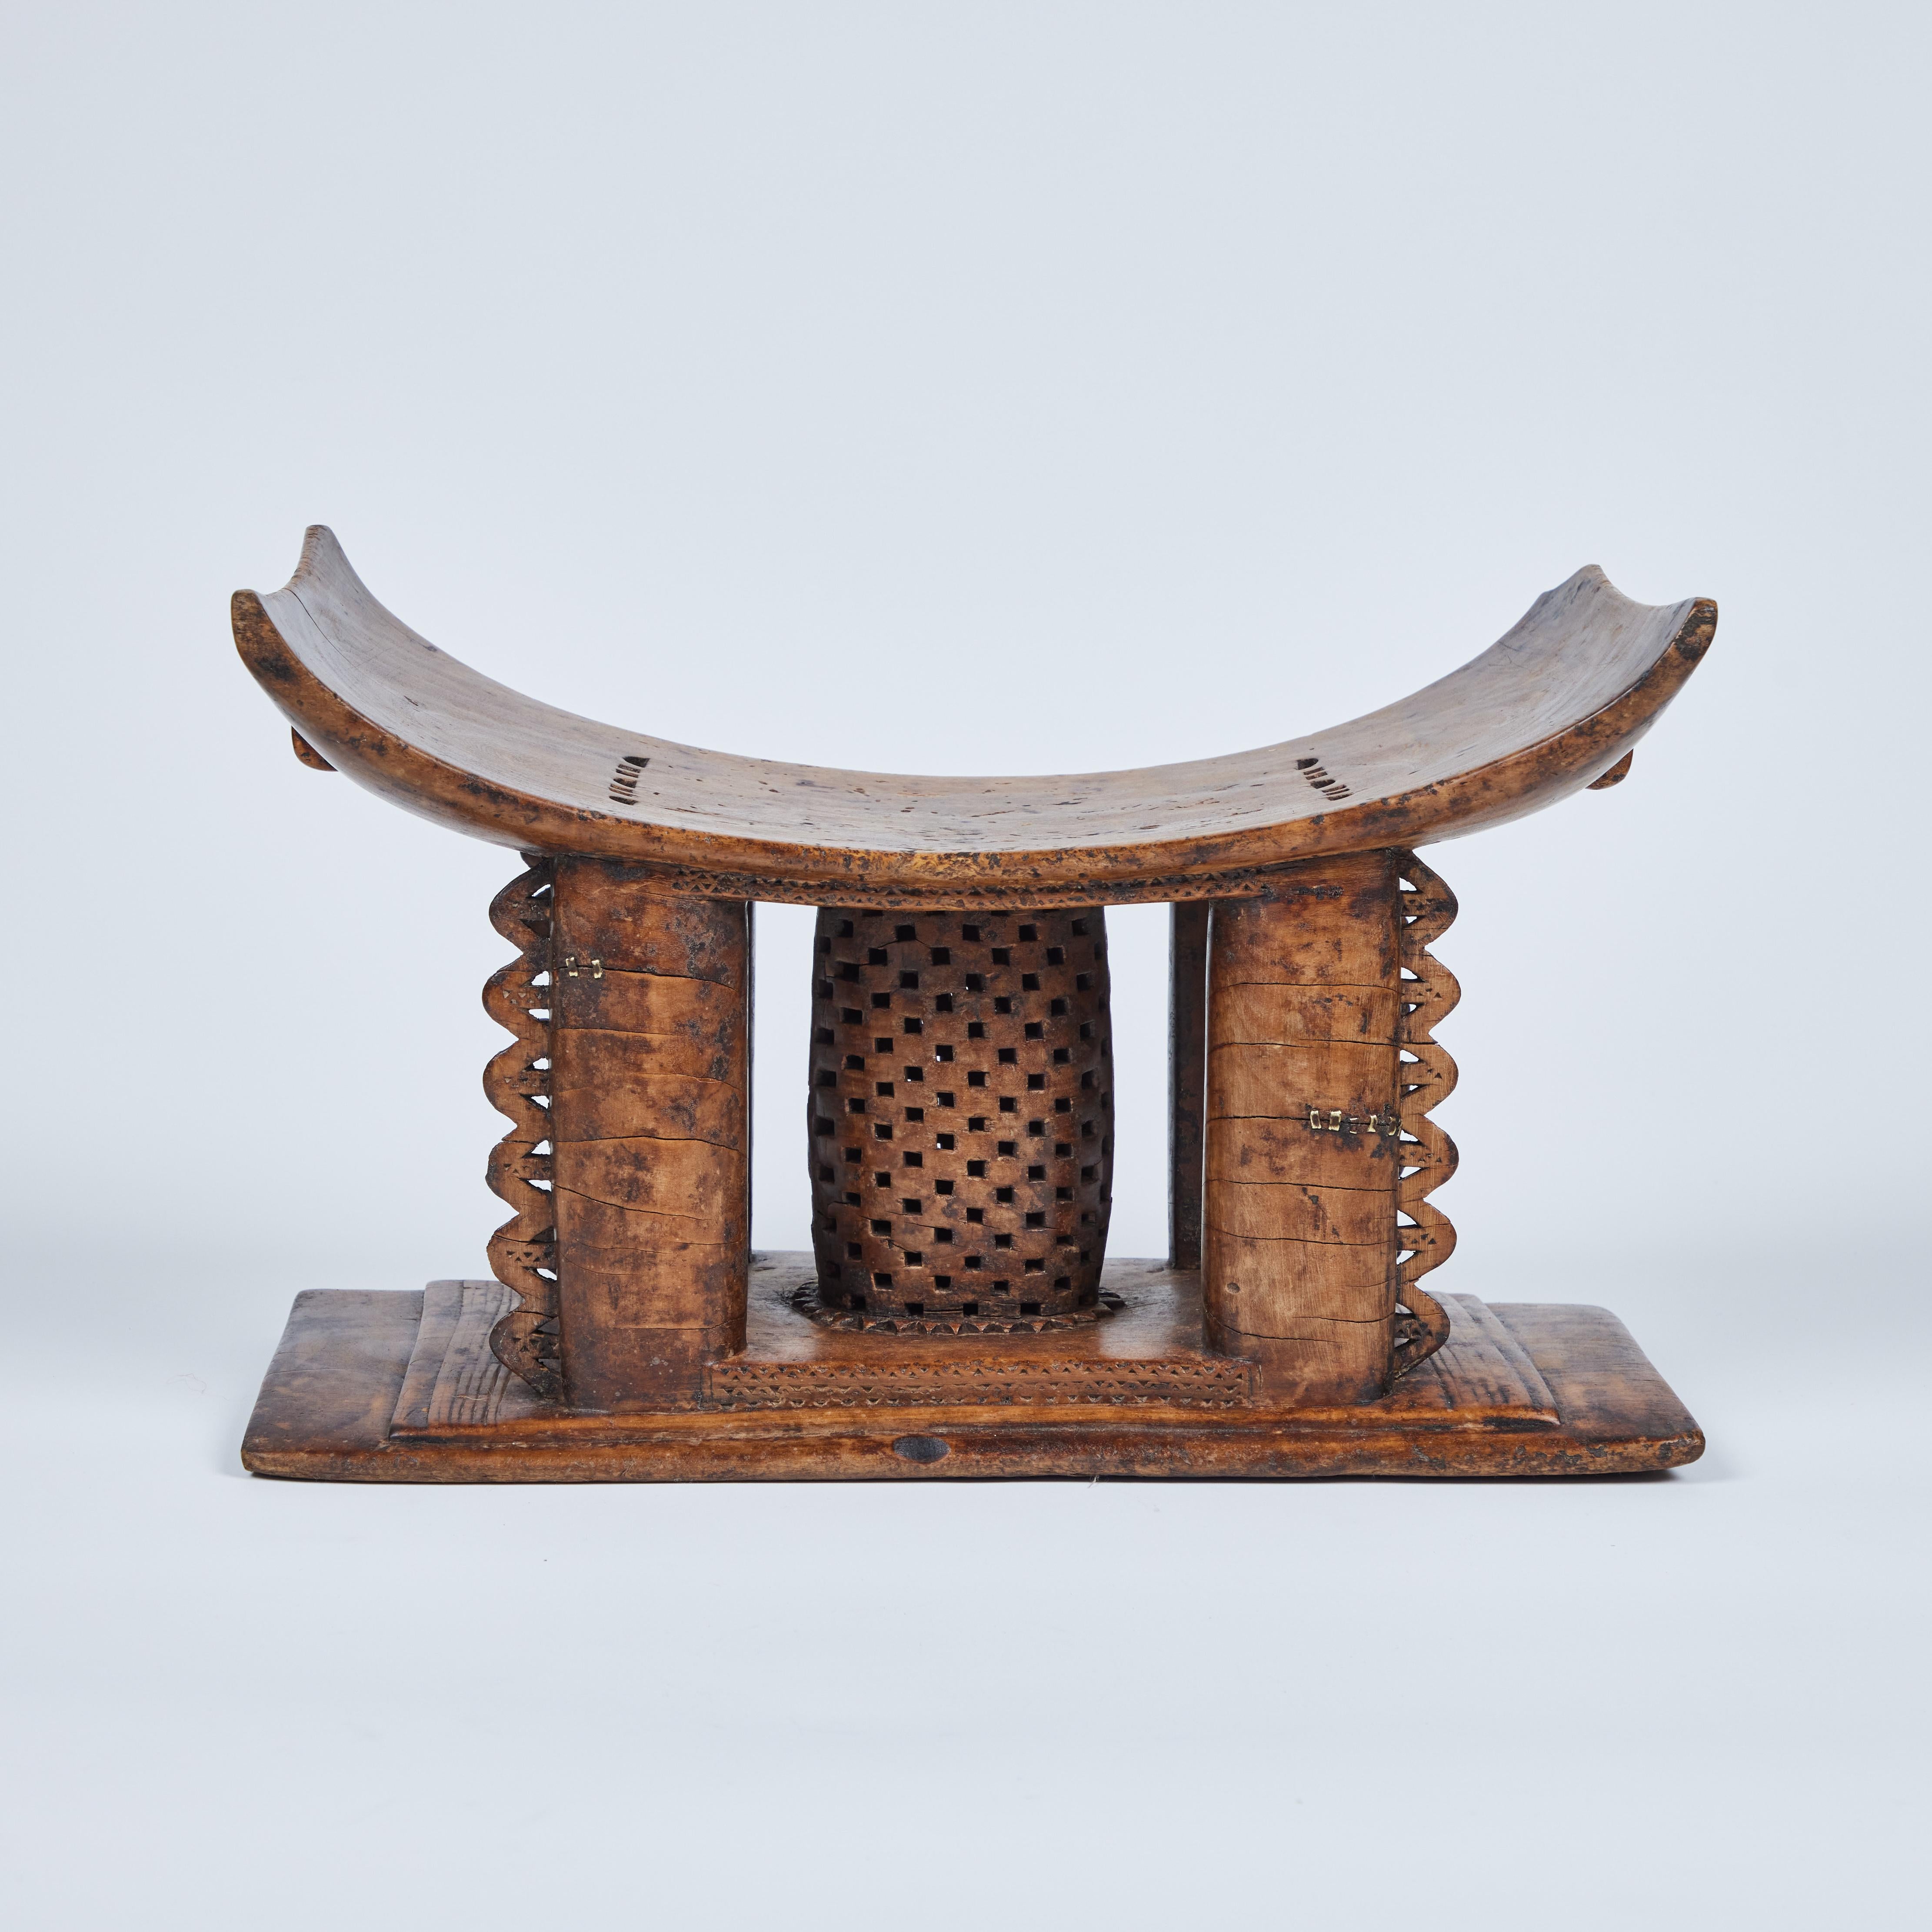 Stools were carved from a single piece of wood, with different designs and meanings. They were given as gifts on marriage and passed from father to son.

According to legend the Asante empire of Akan-speaking people on the Gold Coast, West Africa,